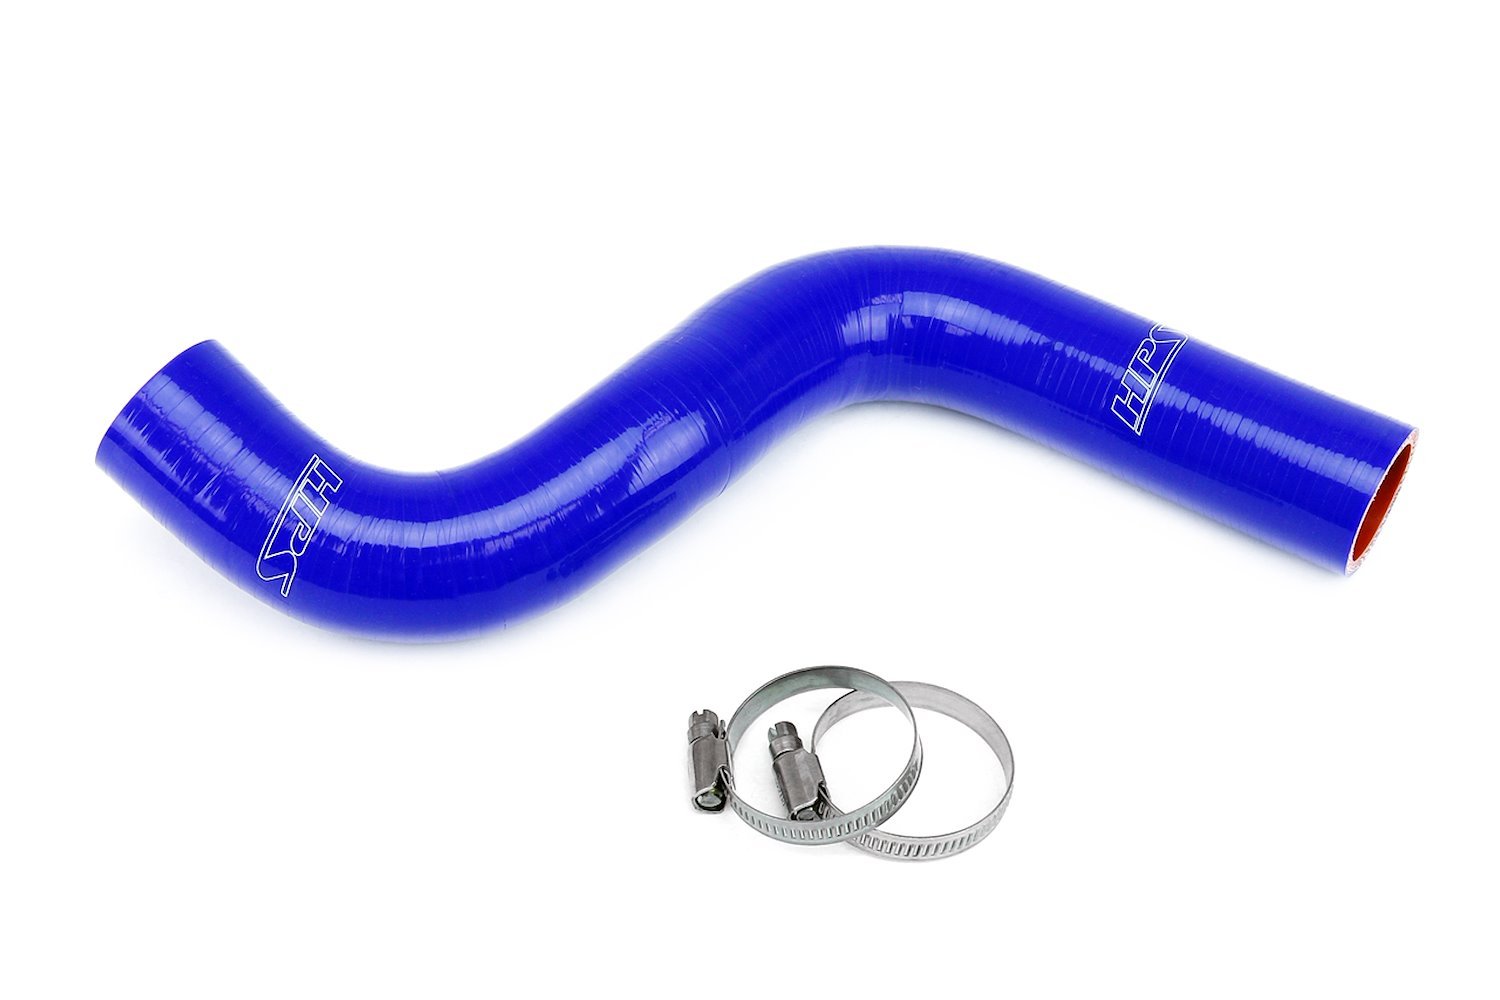 57-2061-BLUE Radiator Hose Kit, 3-Ply Reinforced Silicone, Replaces Rubber Upper Radiator Coolant Hose.